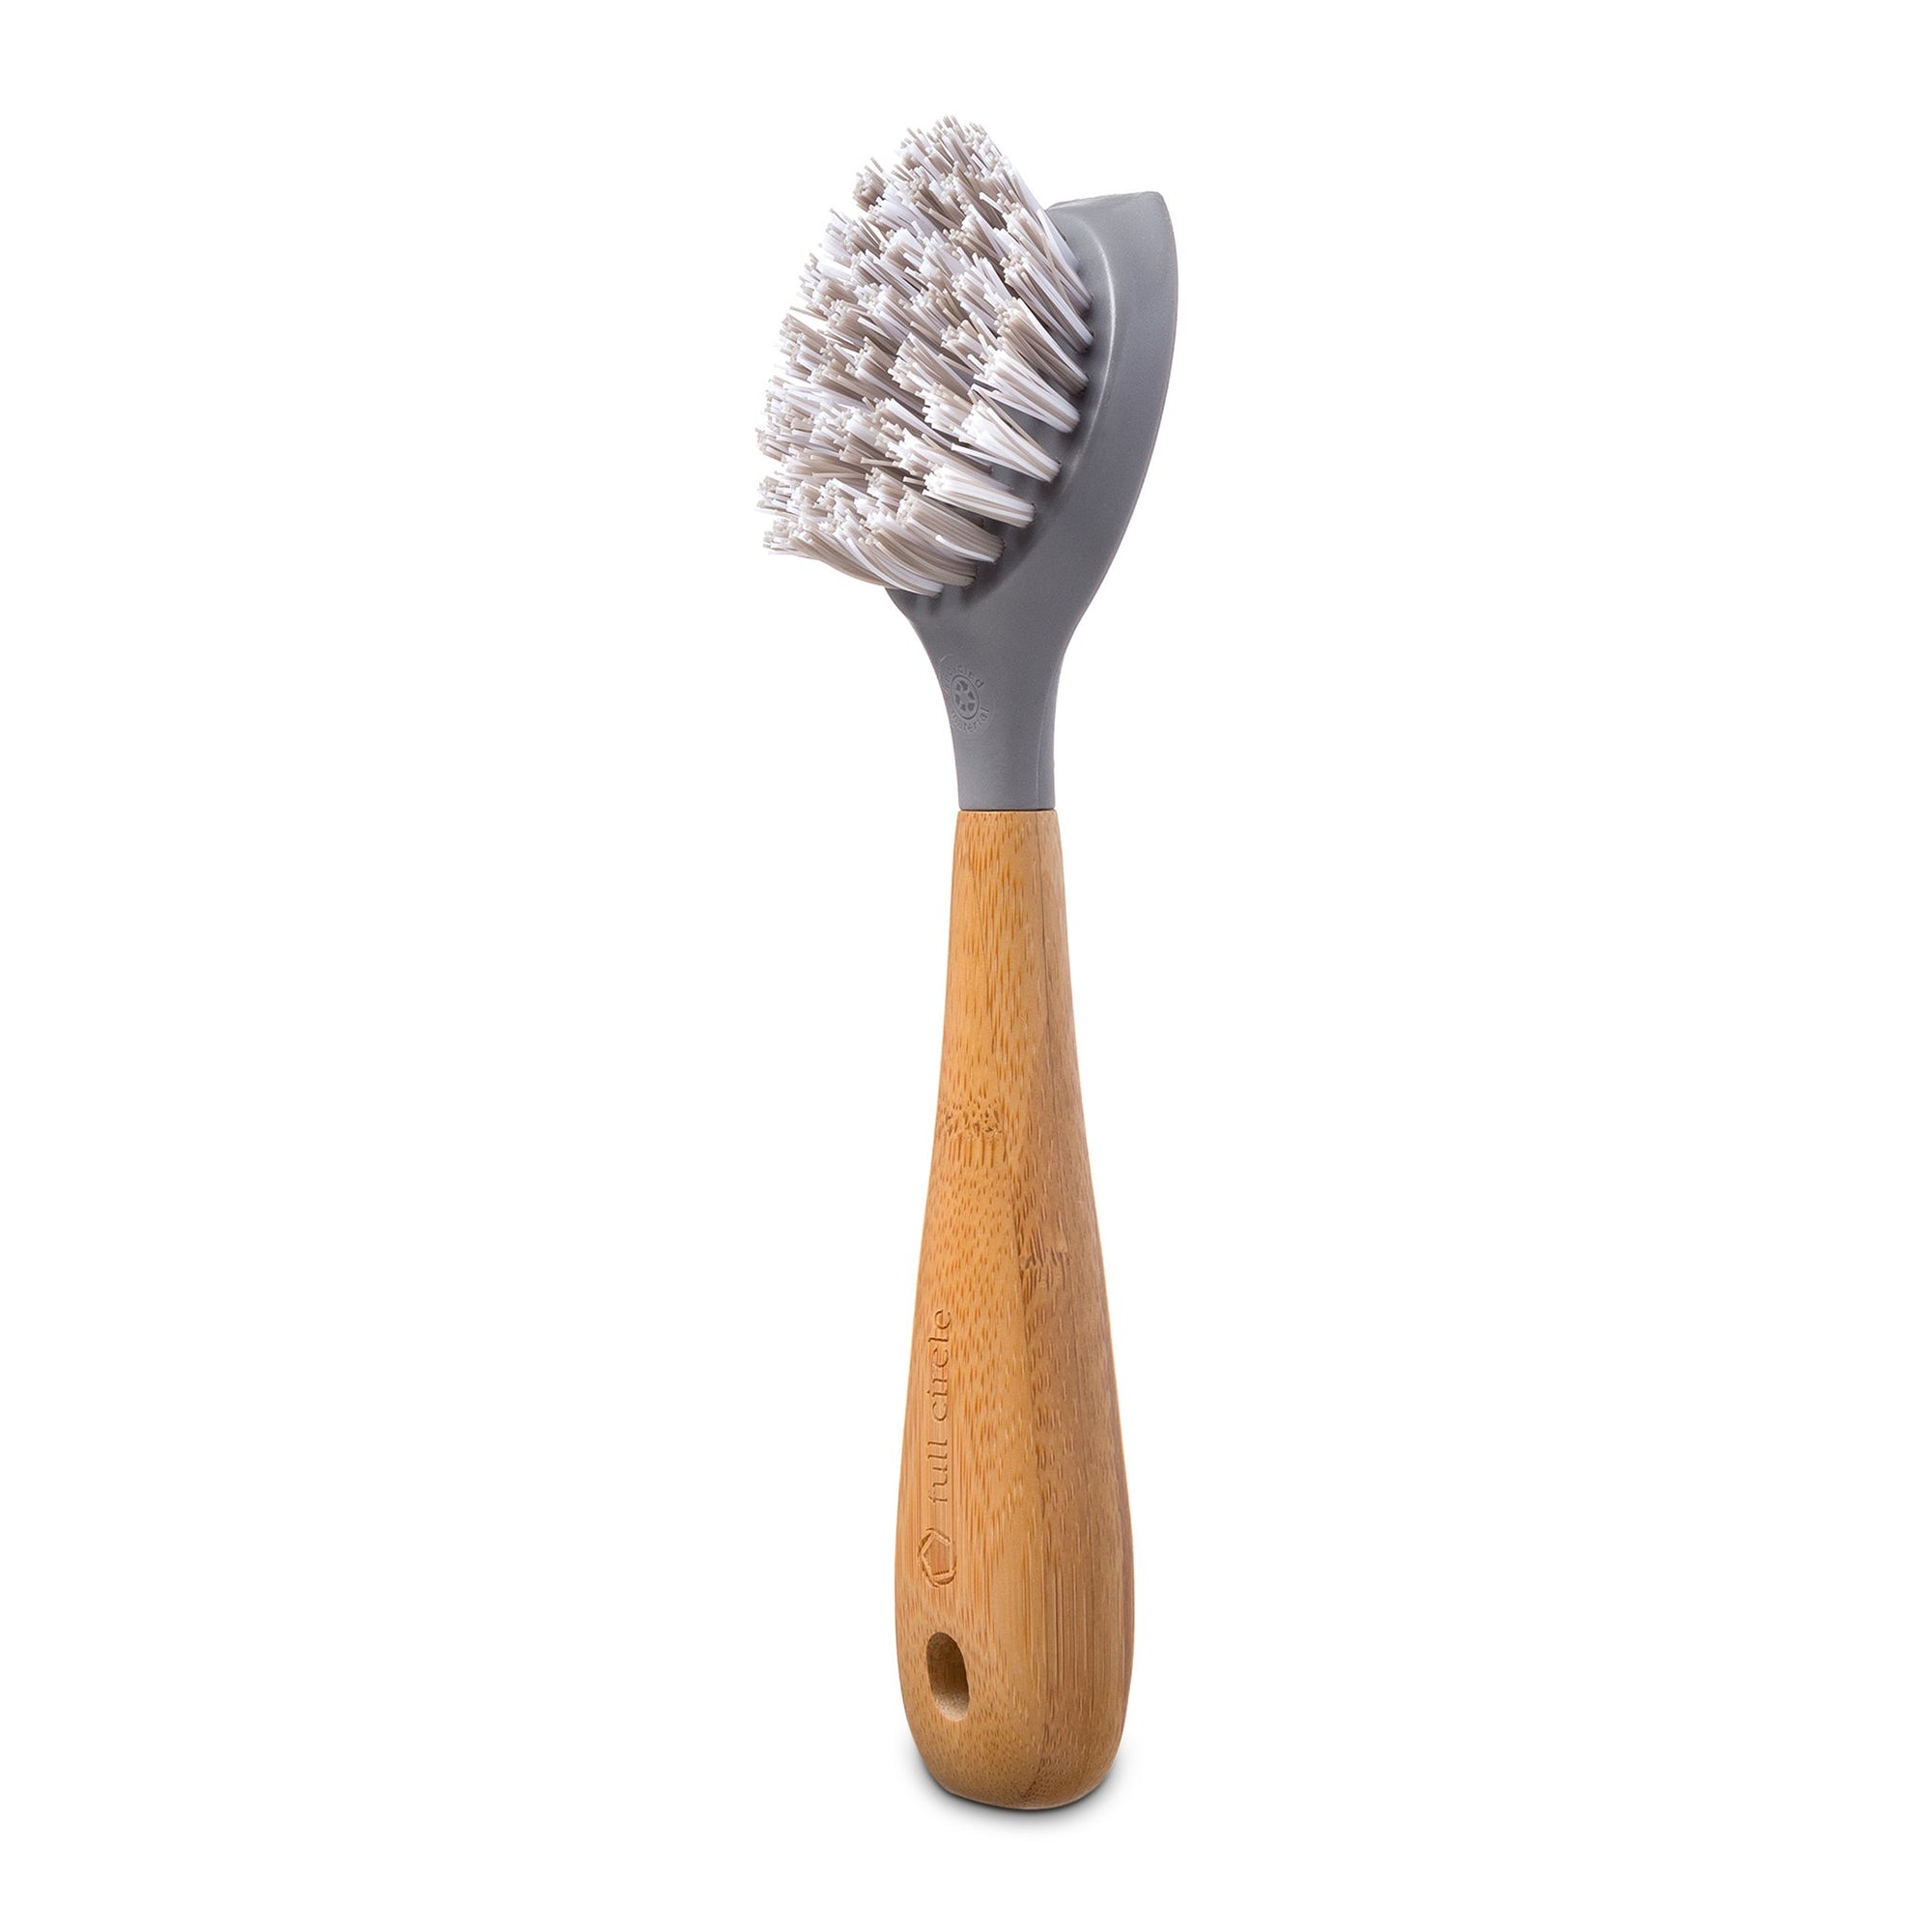  Cast Iron Brush Scrubber & Free Replacement Scrub Brush Head –  Non-Scratch Cast Iron Scrub Brush – Scrubber Brush to Cleans Pre-Seasoned  Pan, Dutch Ovens, Waffle Iron Pans, Griddle, Skillet, Wok